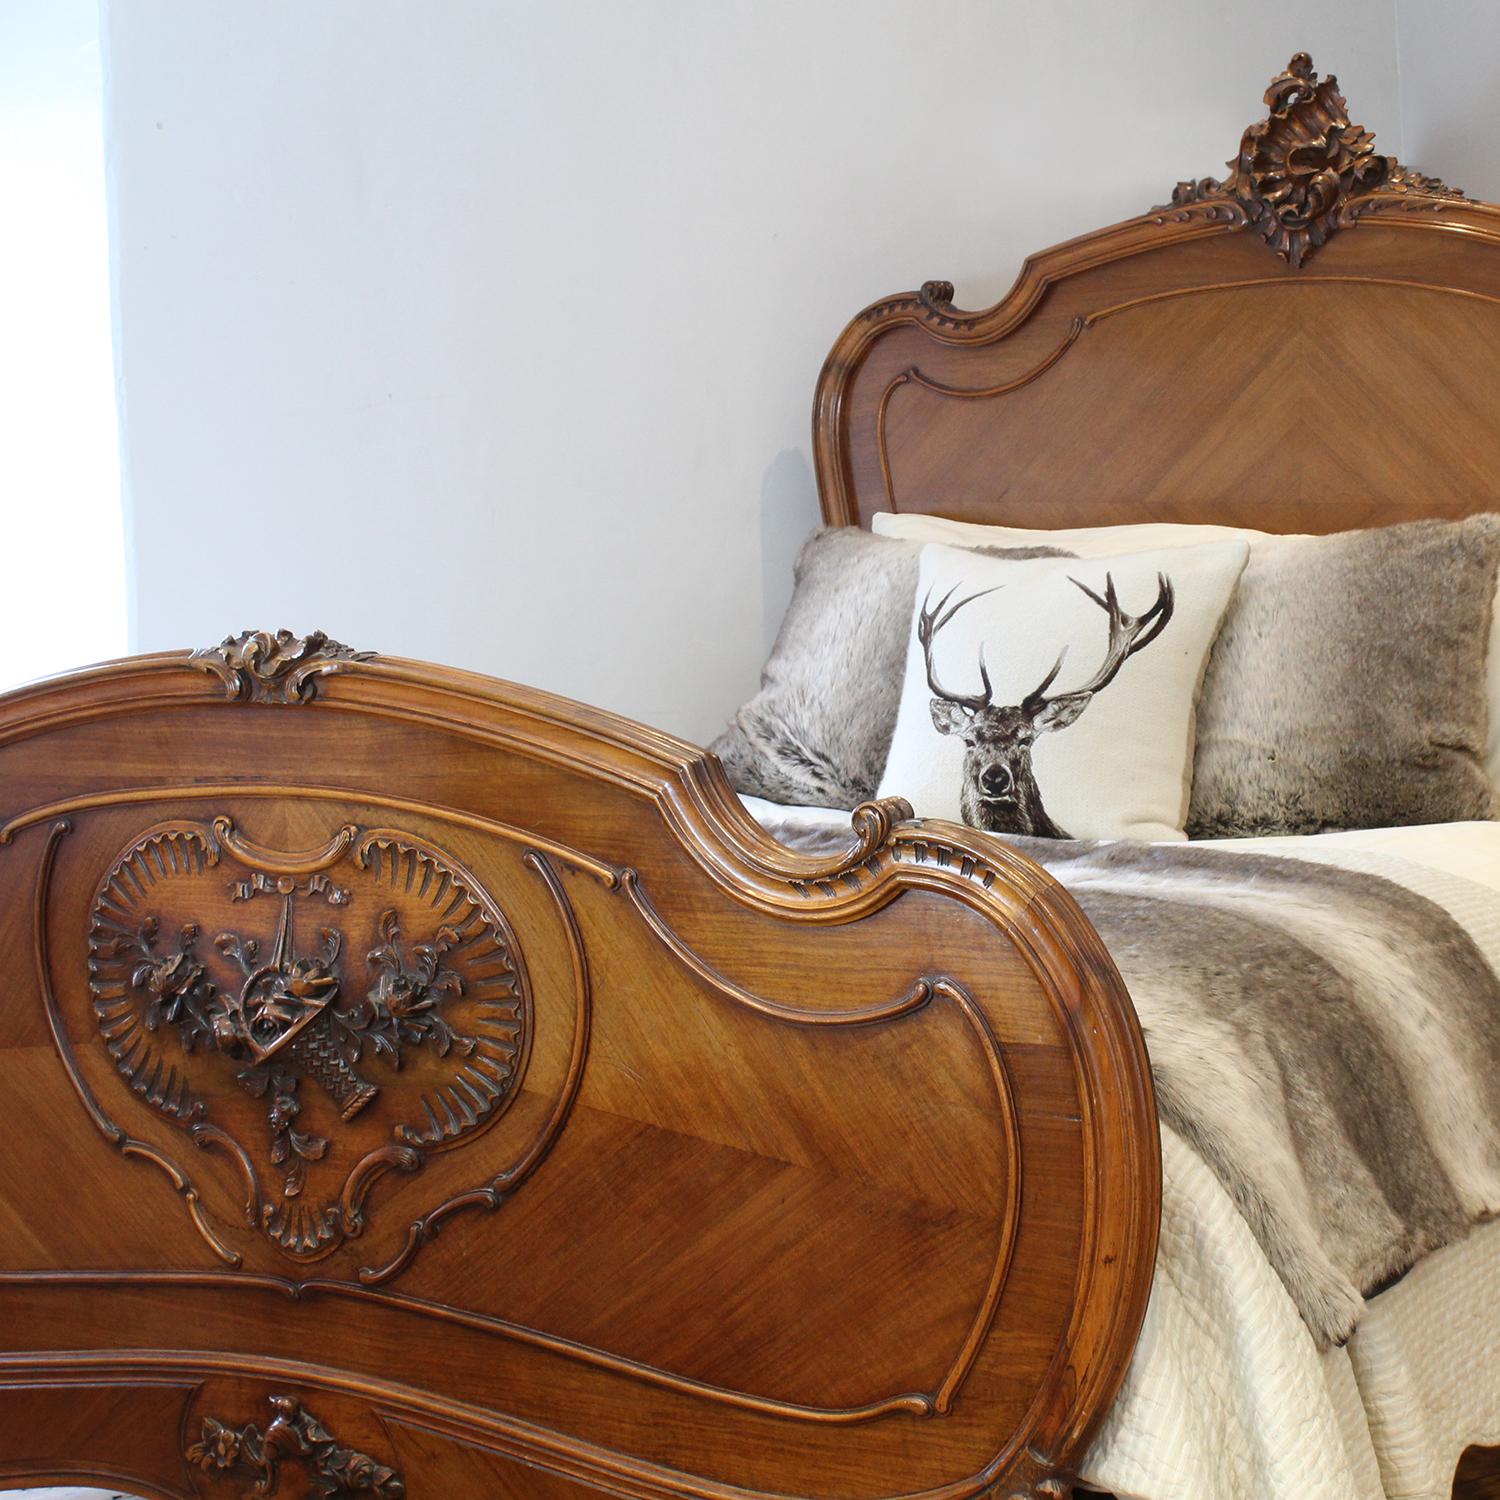 A Louis XV style bed in walnut with shield design feature in the footboard containing a detailed carving of a basket of flowers, and ornate carving on the pediment of the head panel. With elegantly shaped shoulders, quartered veneered panels and